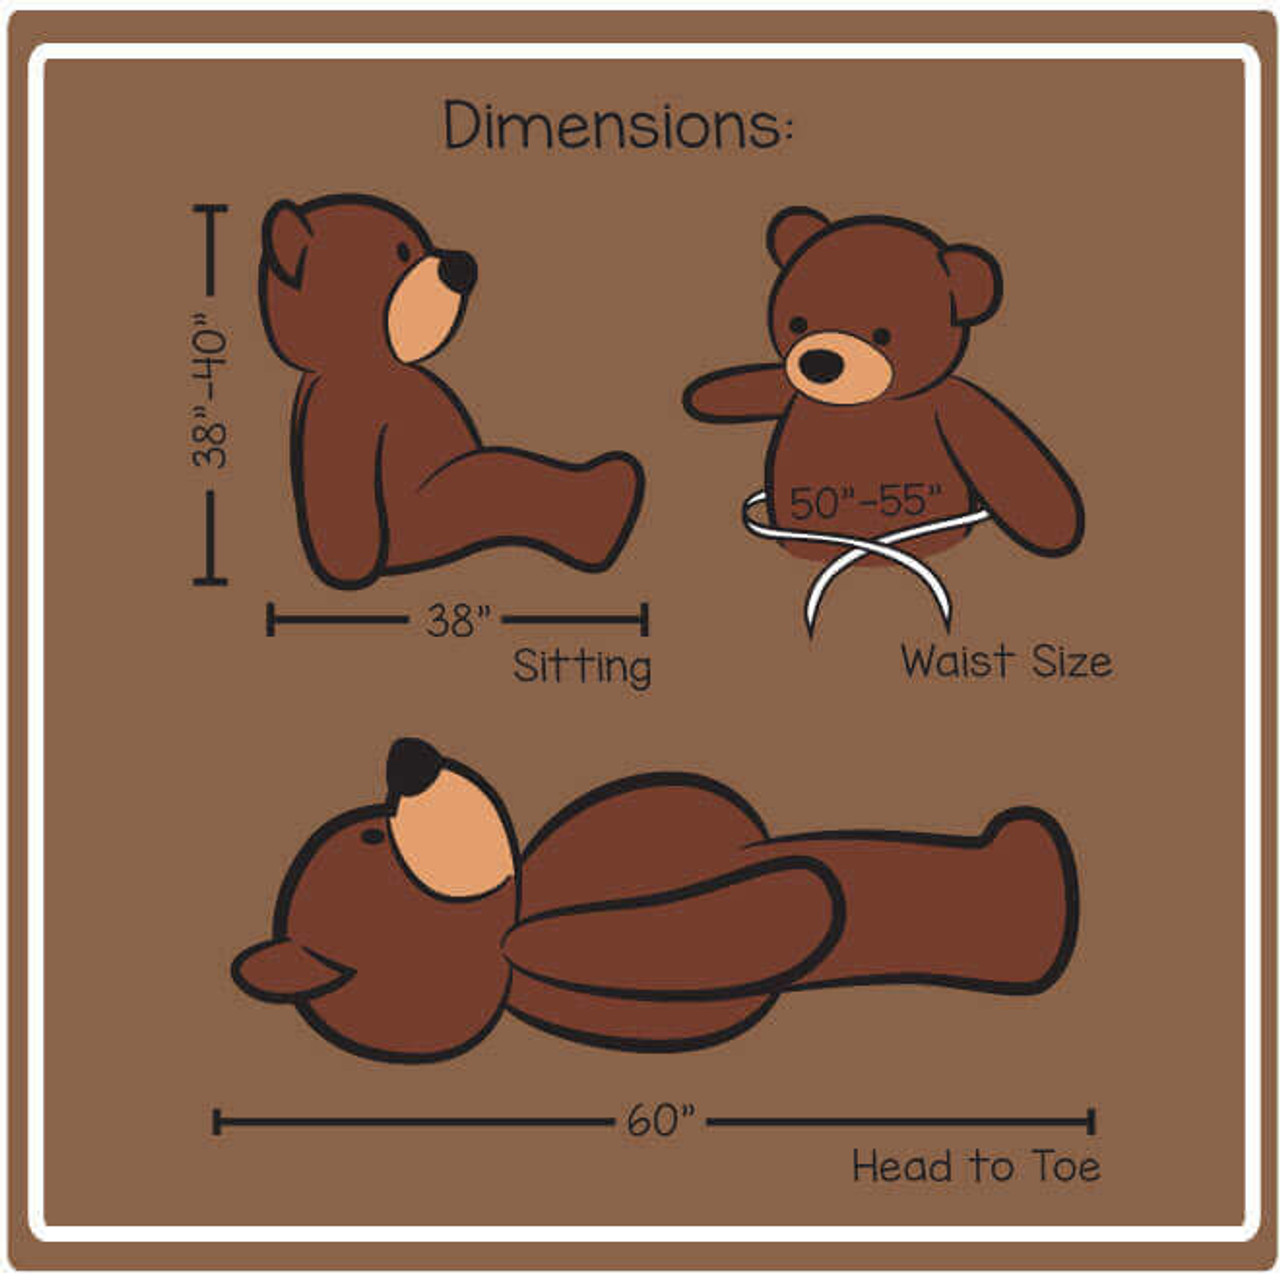 Dimensions for Cozy Cuddles